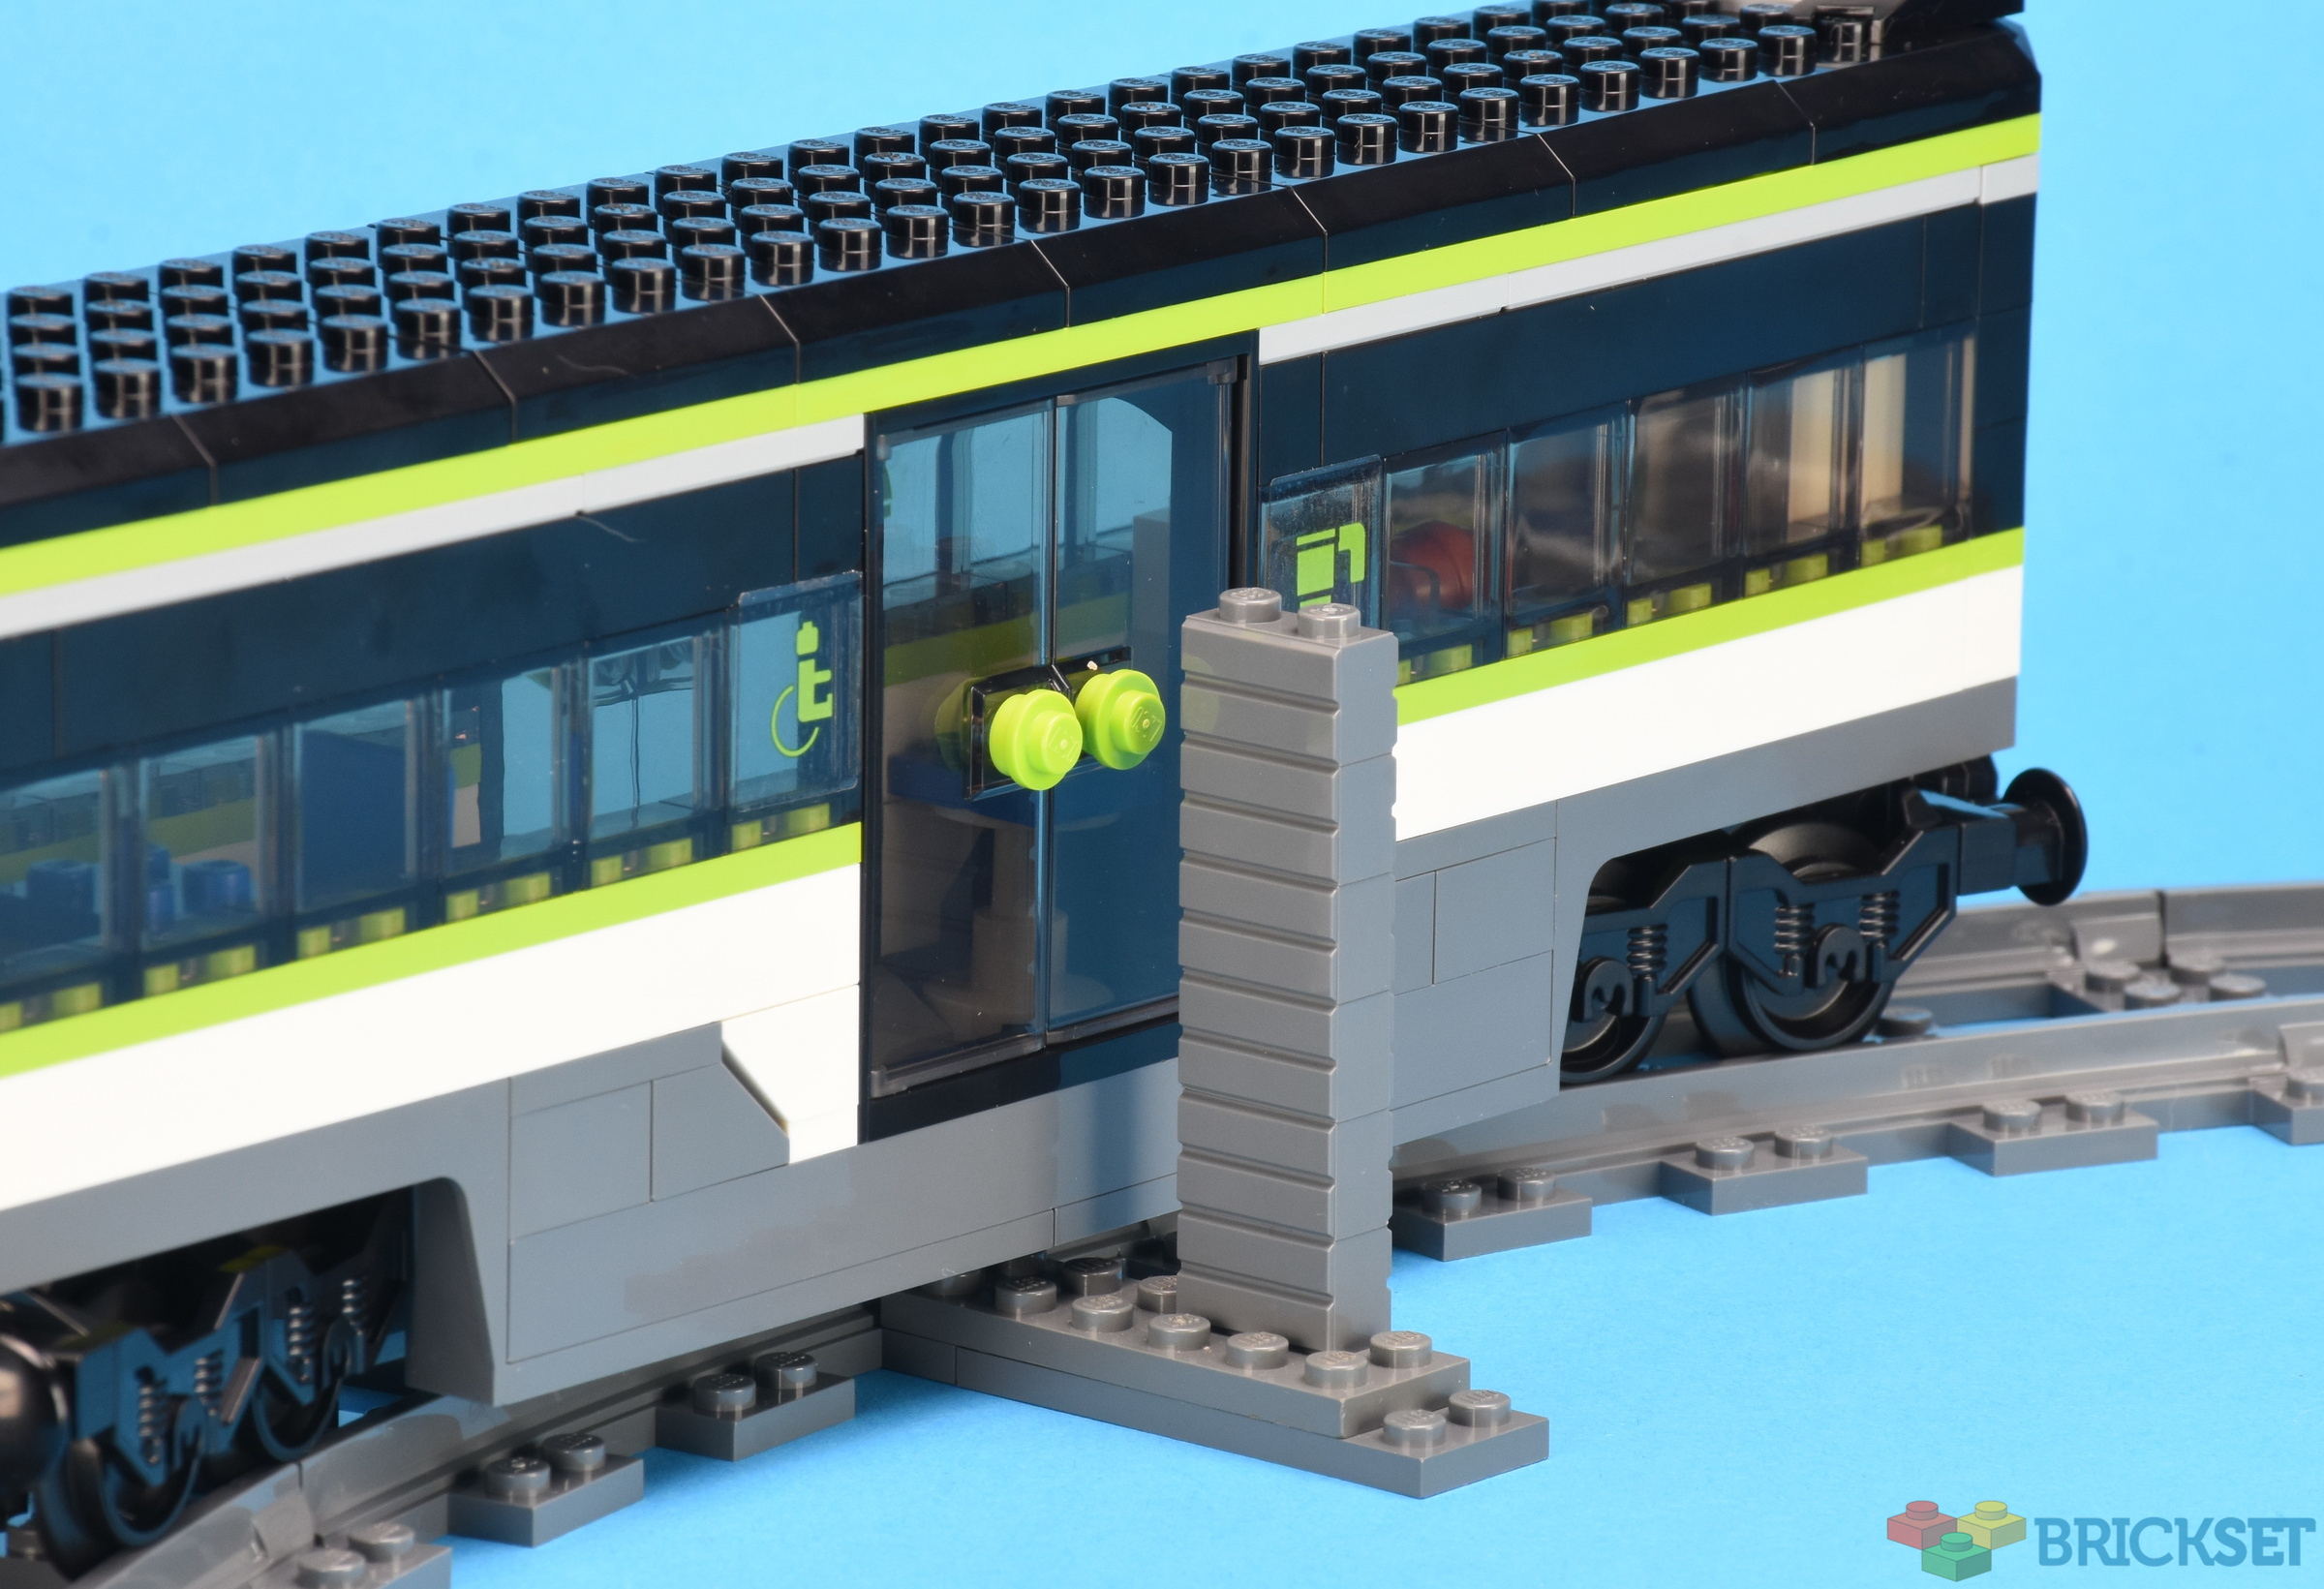 LEGO City Express Passenger Train 60337 review & running! The one they'll  miss it after it's gone 